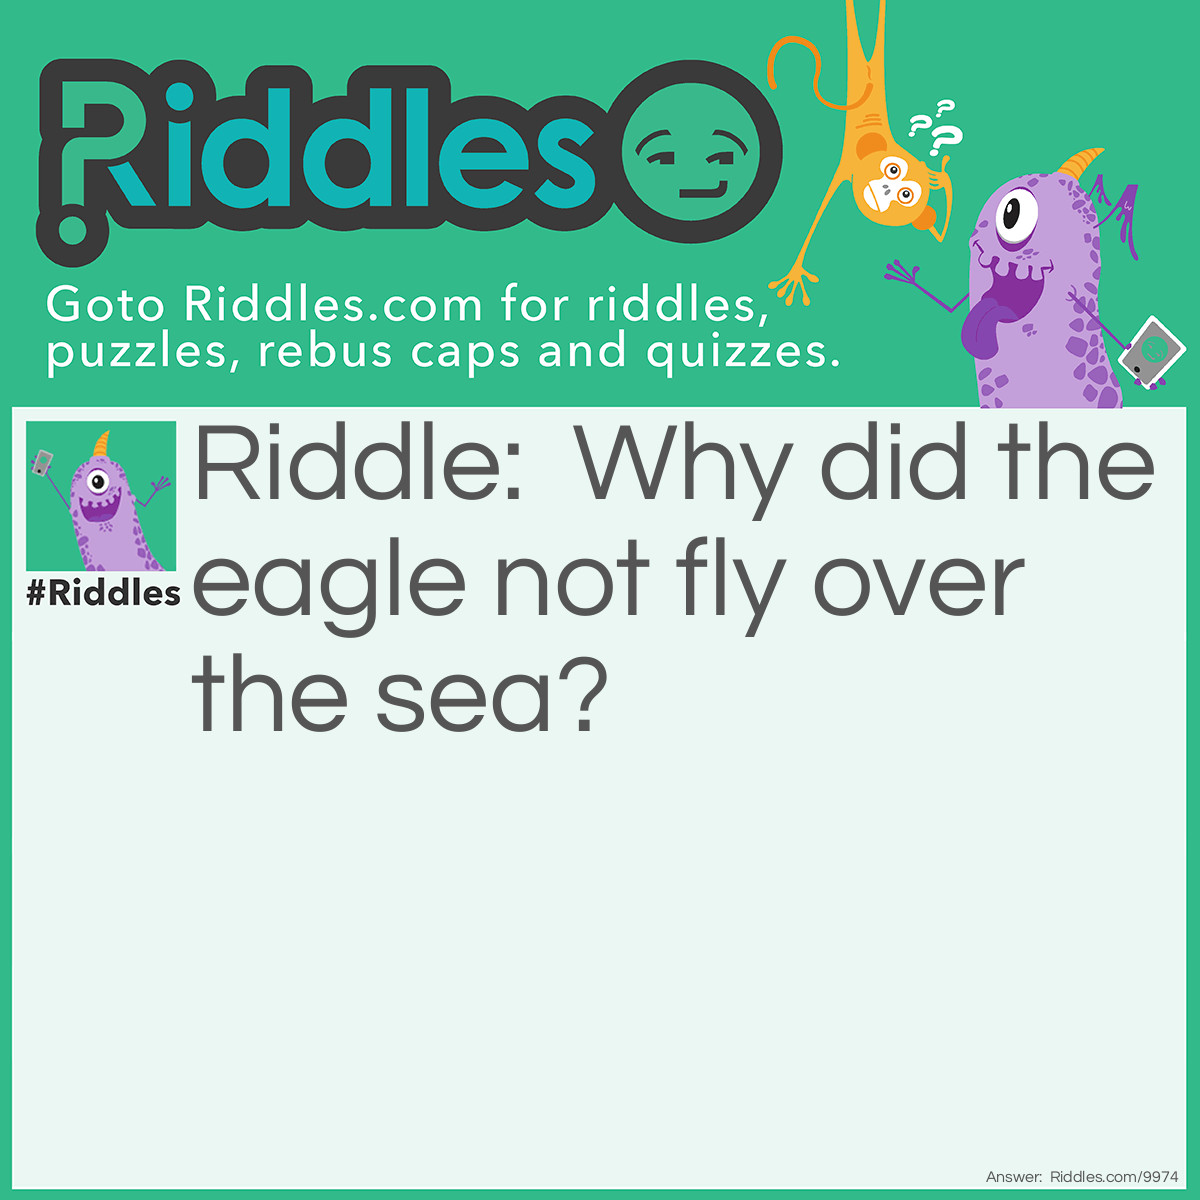 Riddle: Why did the eagle not fly over the sea? Answer: Because if it flew over the sea it will be a seagull.